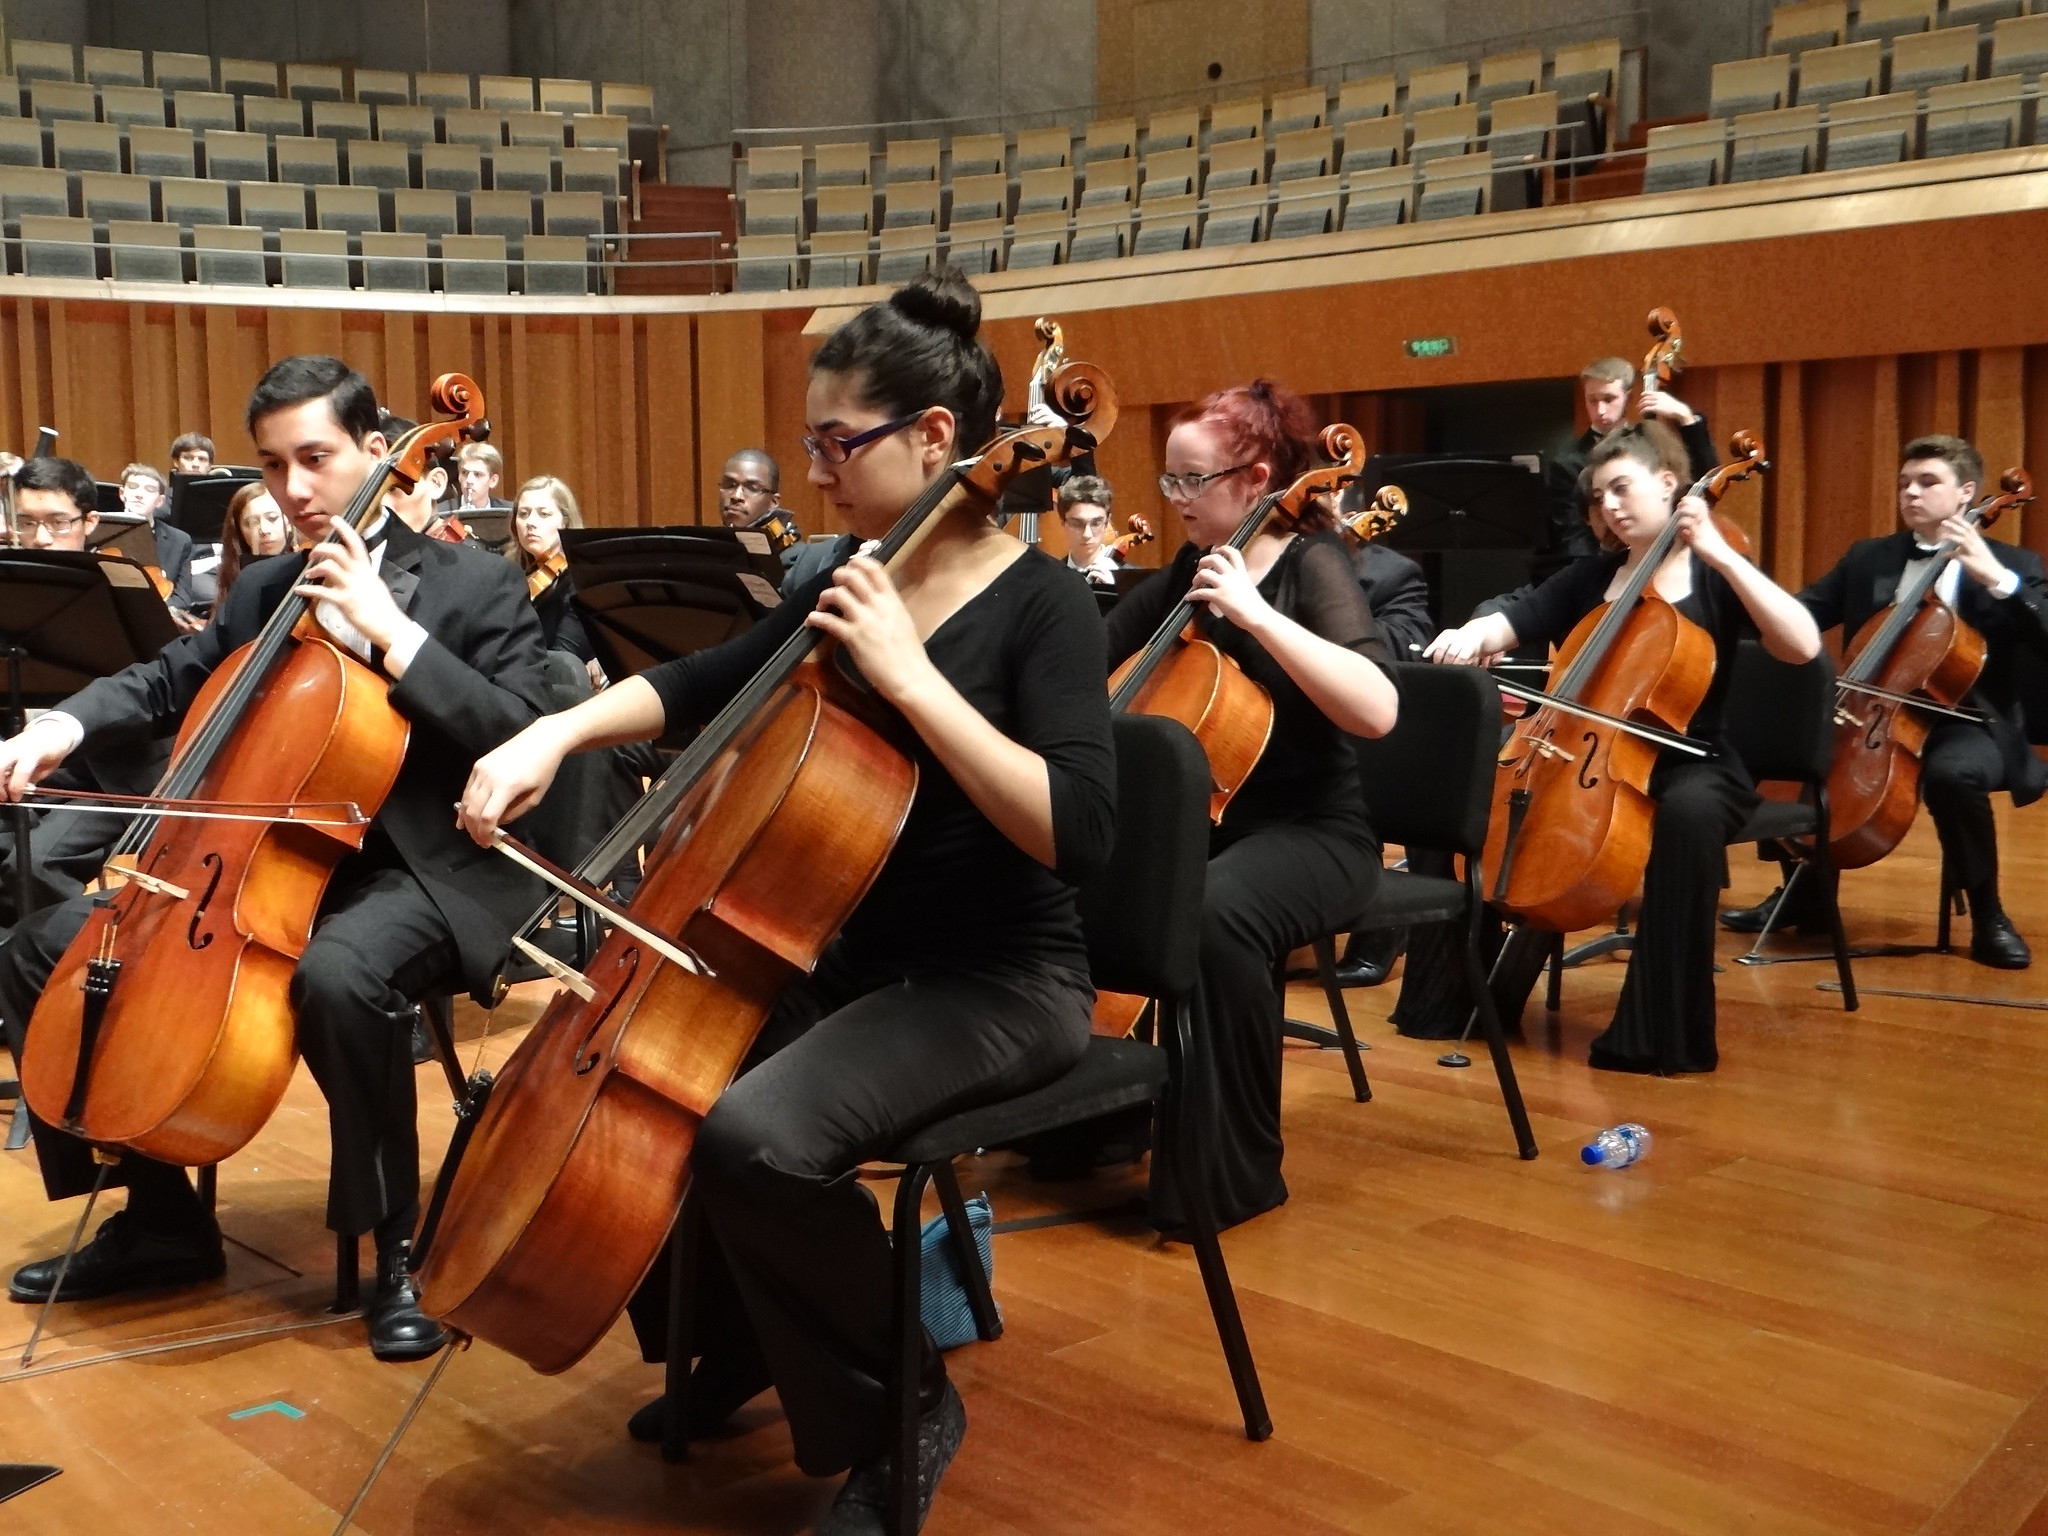 CYSO Cello Section in Action @ National Centre for Performing Arts